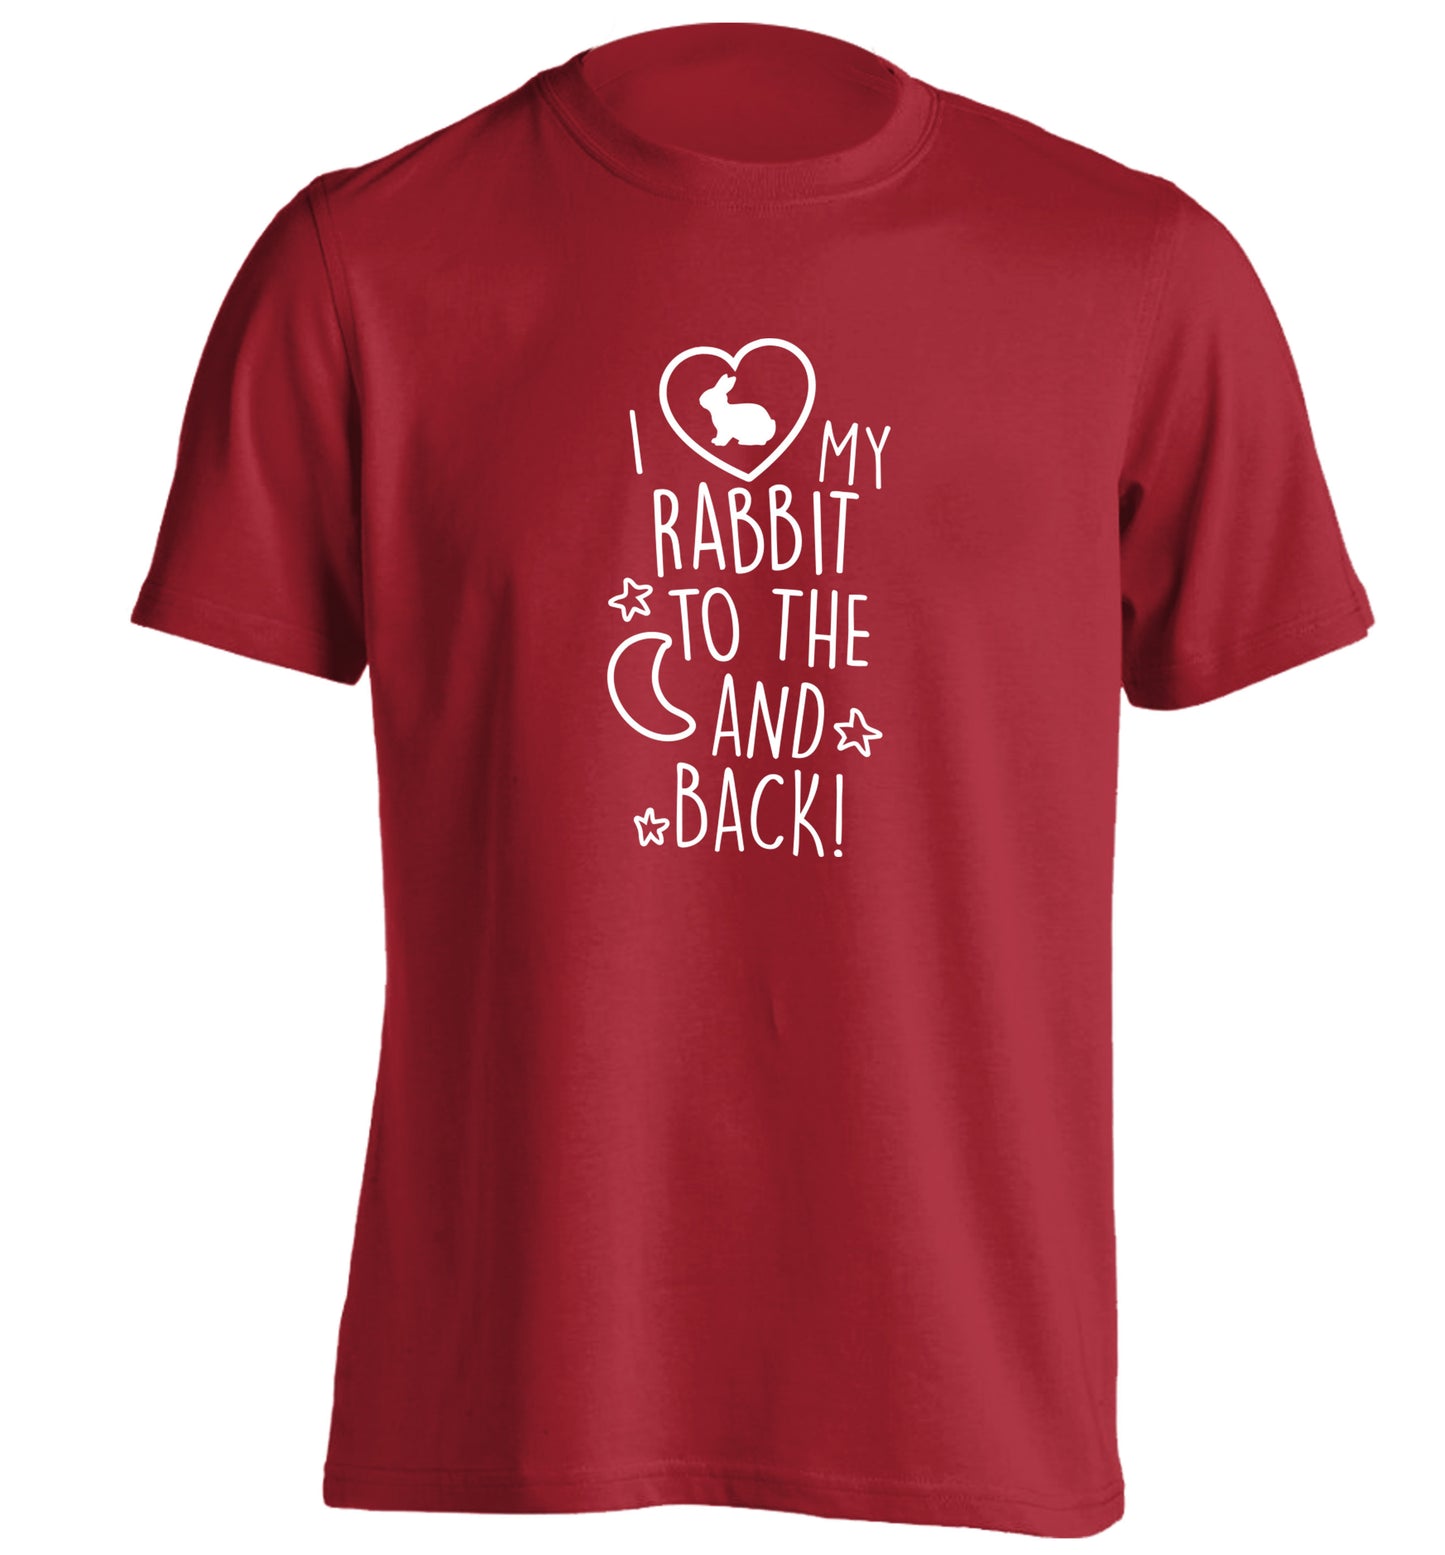 I love my rabbit to the moon and back adults unisex red Tshirt 2XL